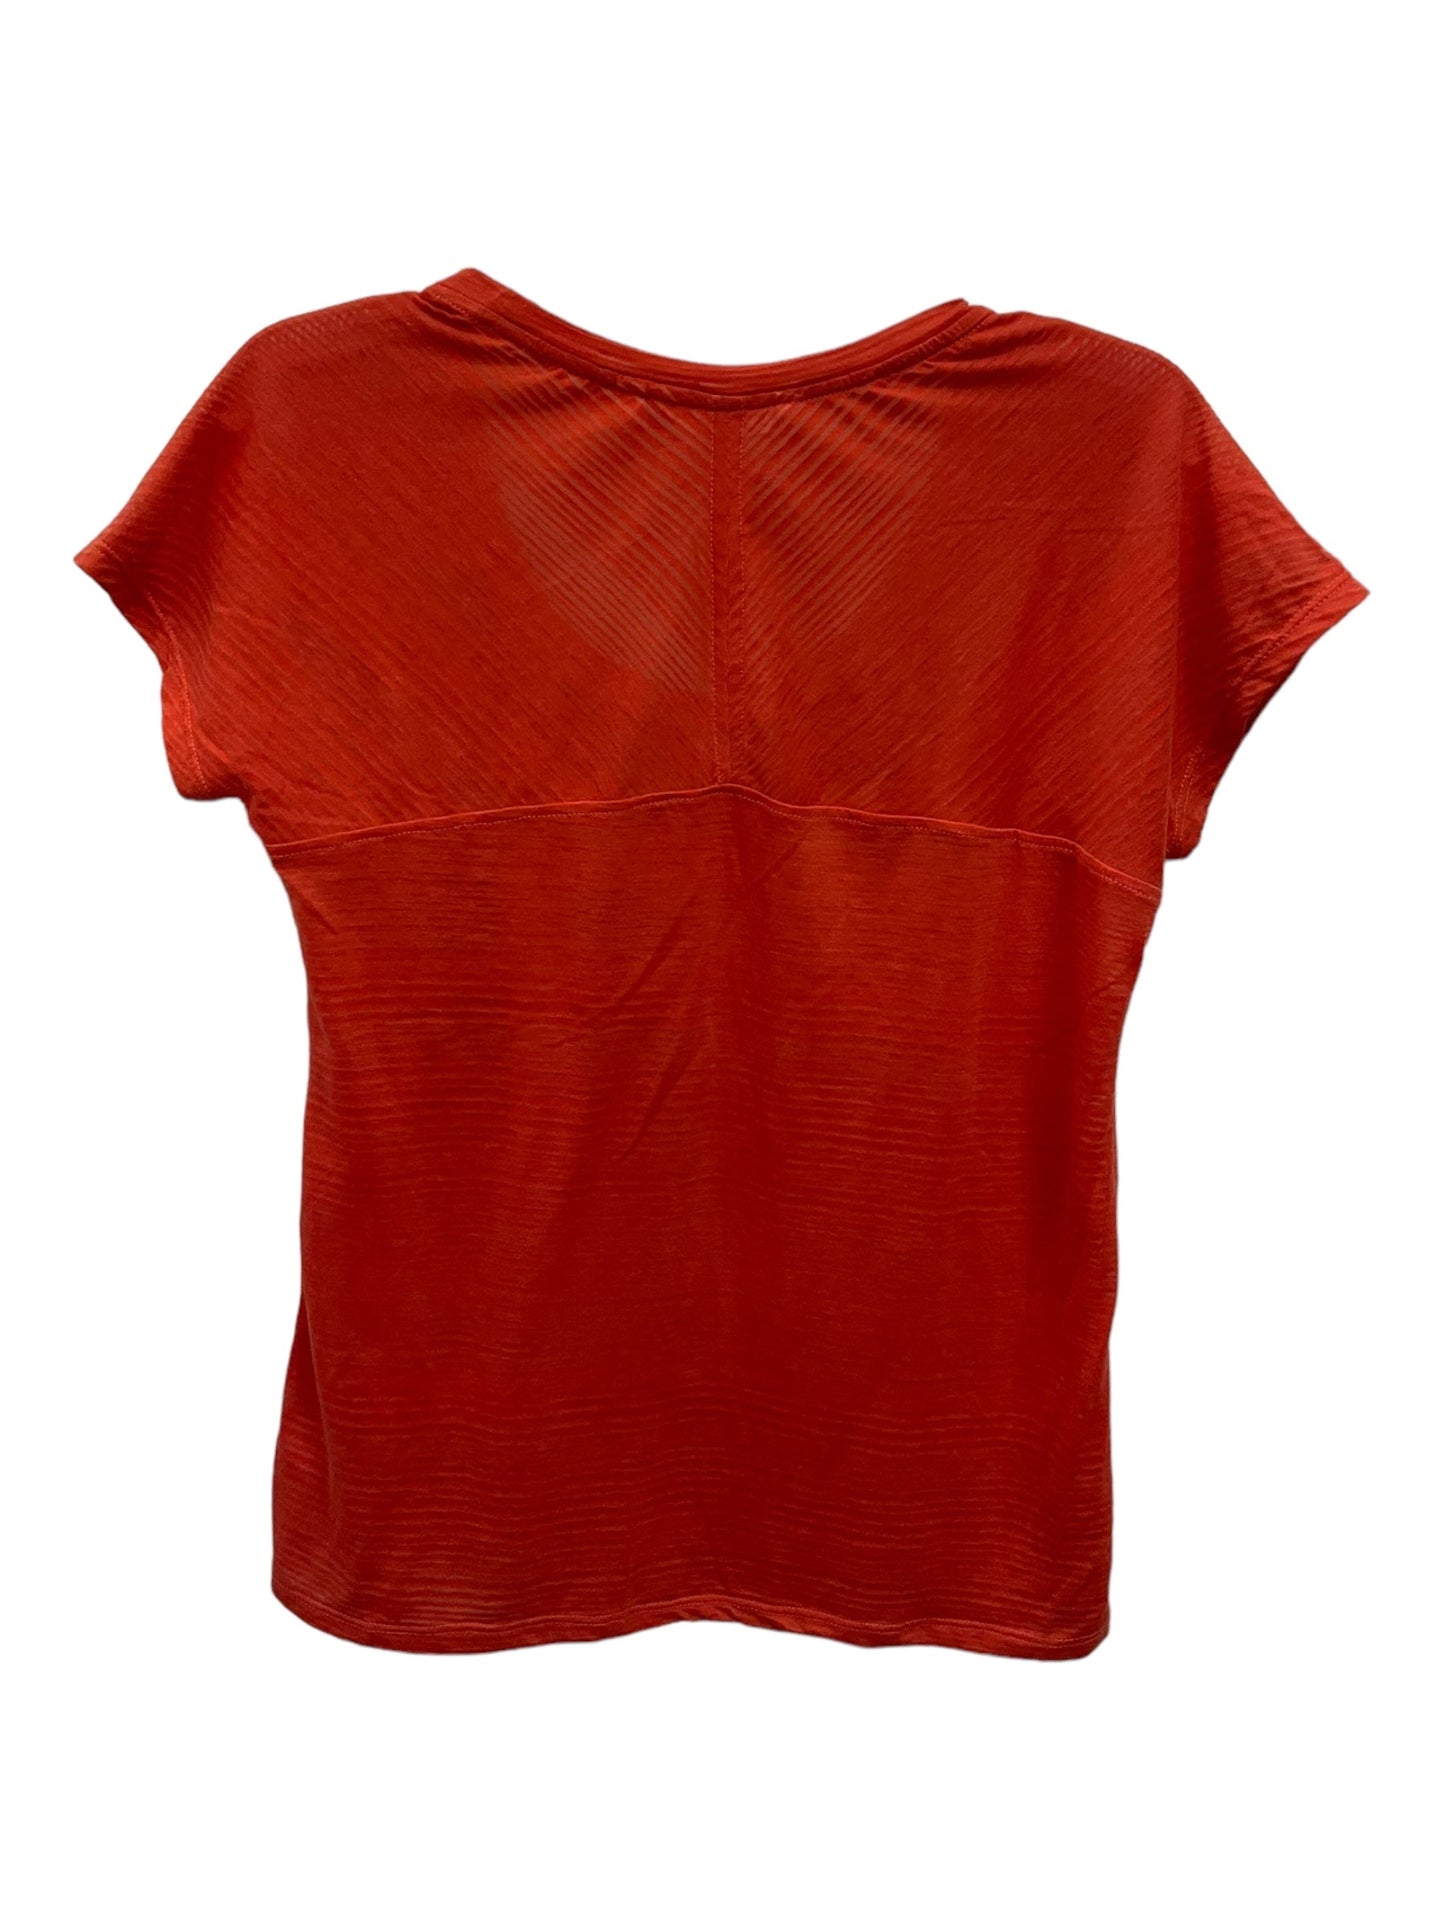 Coral Athletic Top Short Sleeve Athleta, Size S